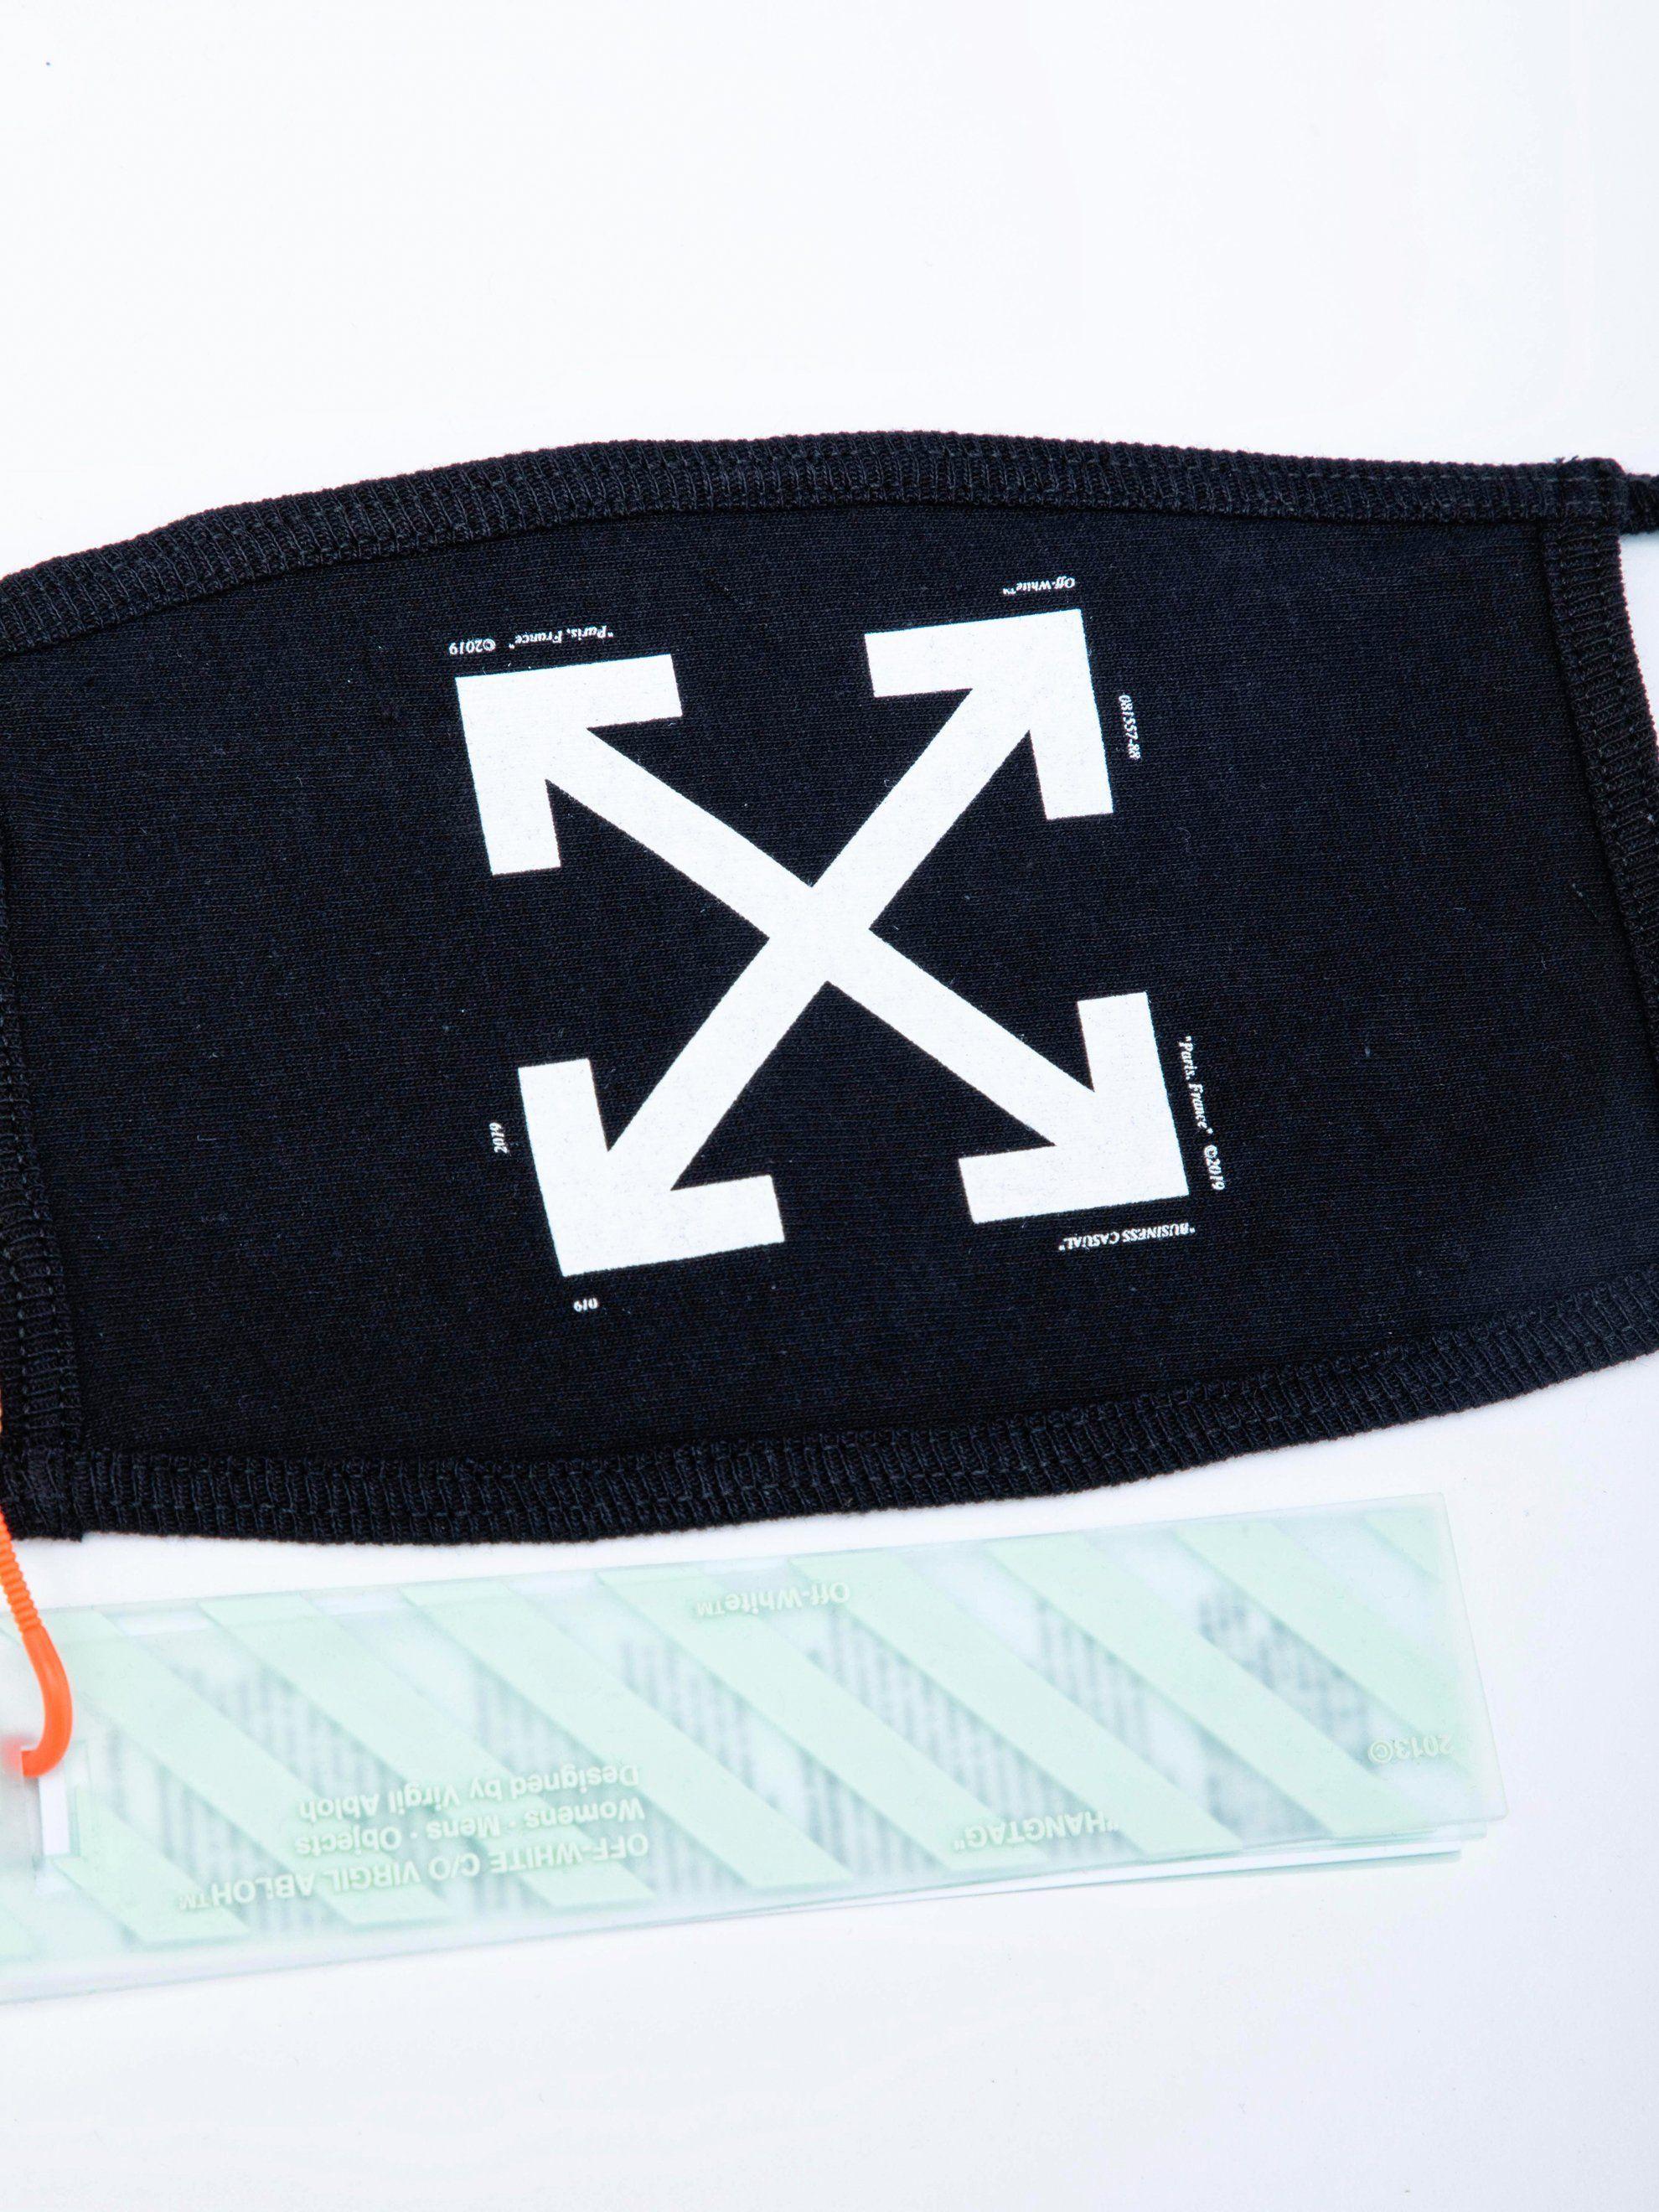 Off White Arrow Brand Logo - Buy OFF-WHITE Arrow Mask Online at UNION LOS ANGELES